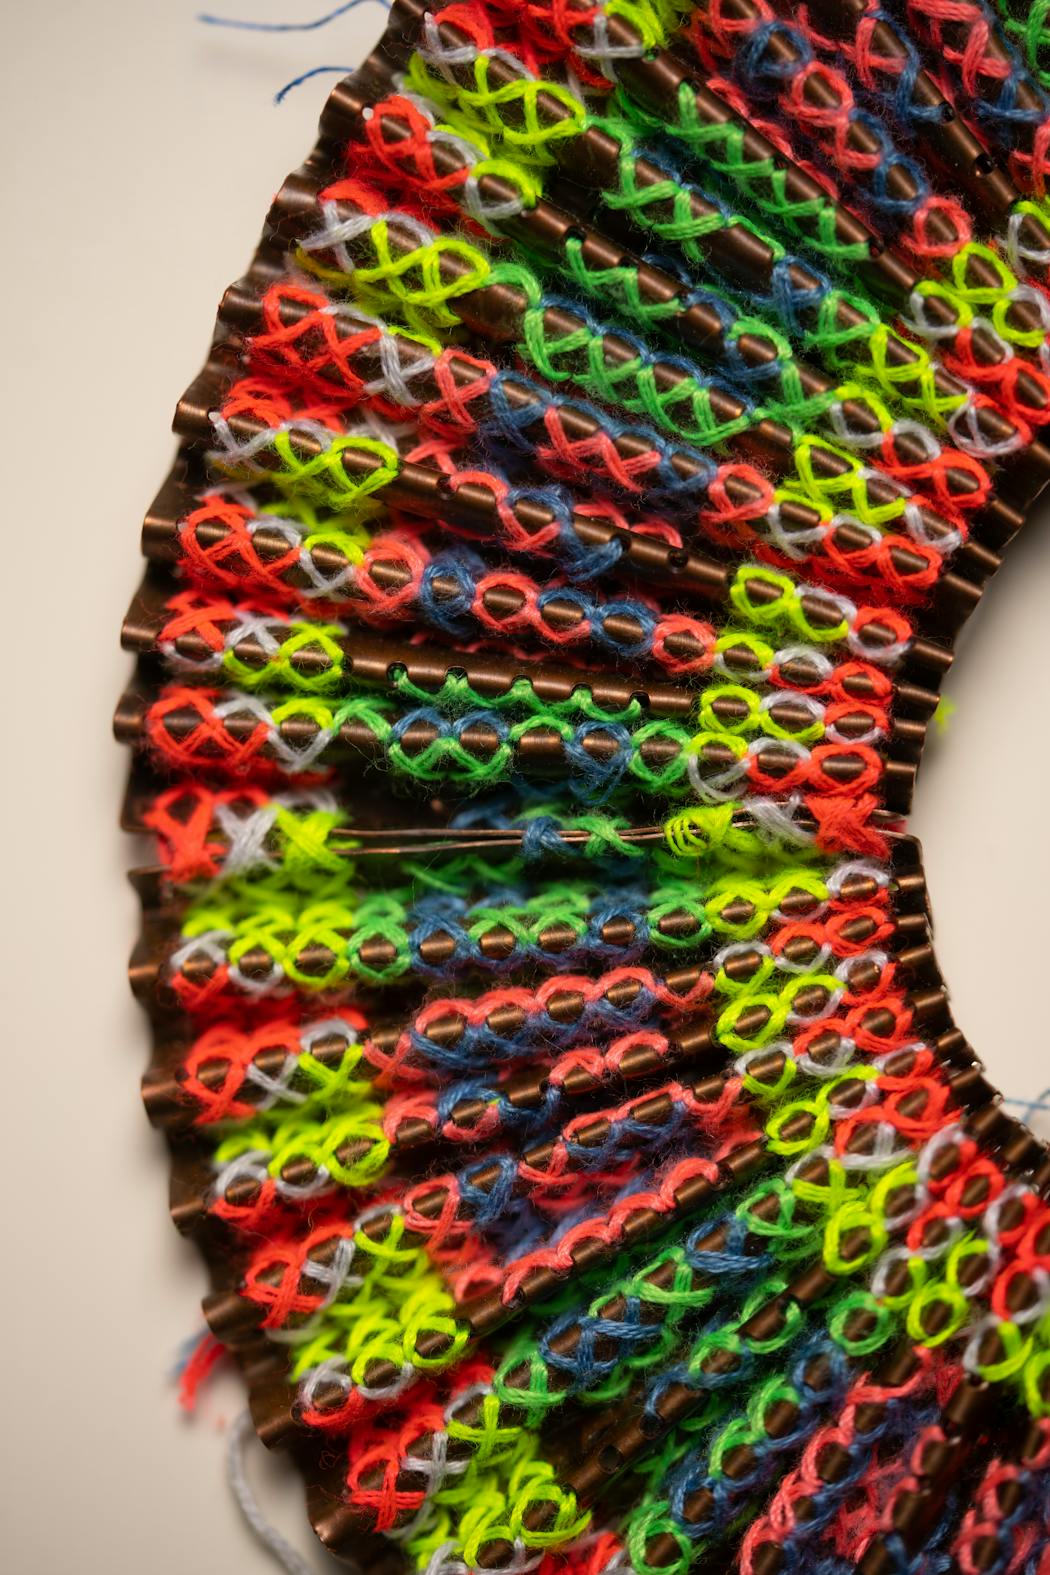 A detail of a necklace made of pleated copper and embroidery that was inspired by a traditional Hmong pleated skirt. The piece was crafted by visual artist Ger Xiong.